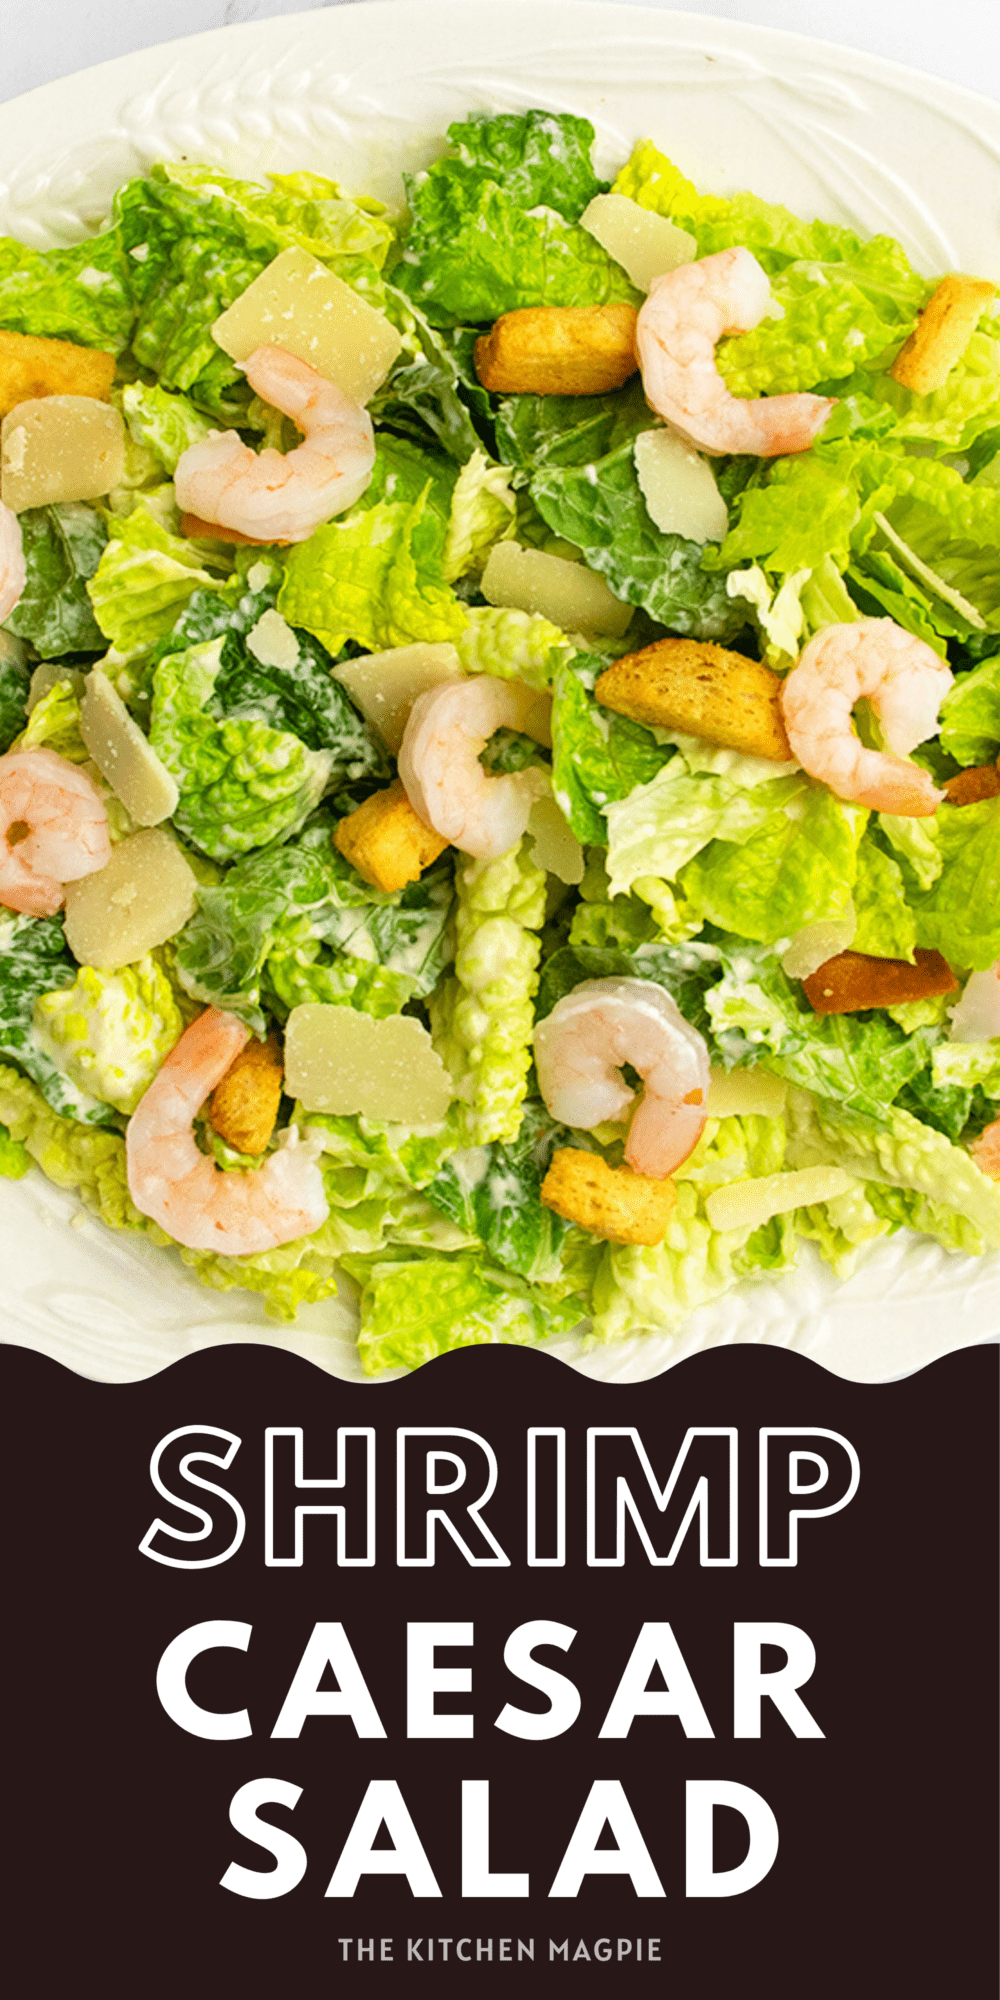 A simple, tasty Caesar salad is a great mainstay when it comes to a light lunch. To make it even better and more nutritious, a healthy helping of shrimp make it way better.